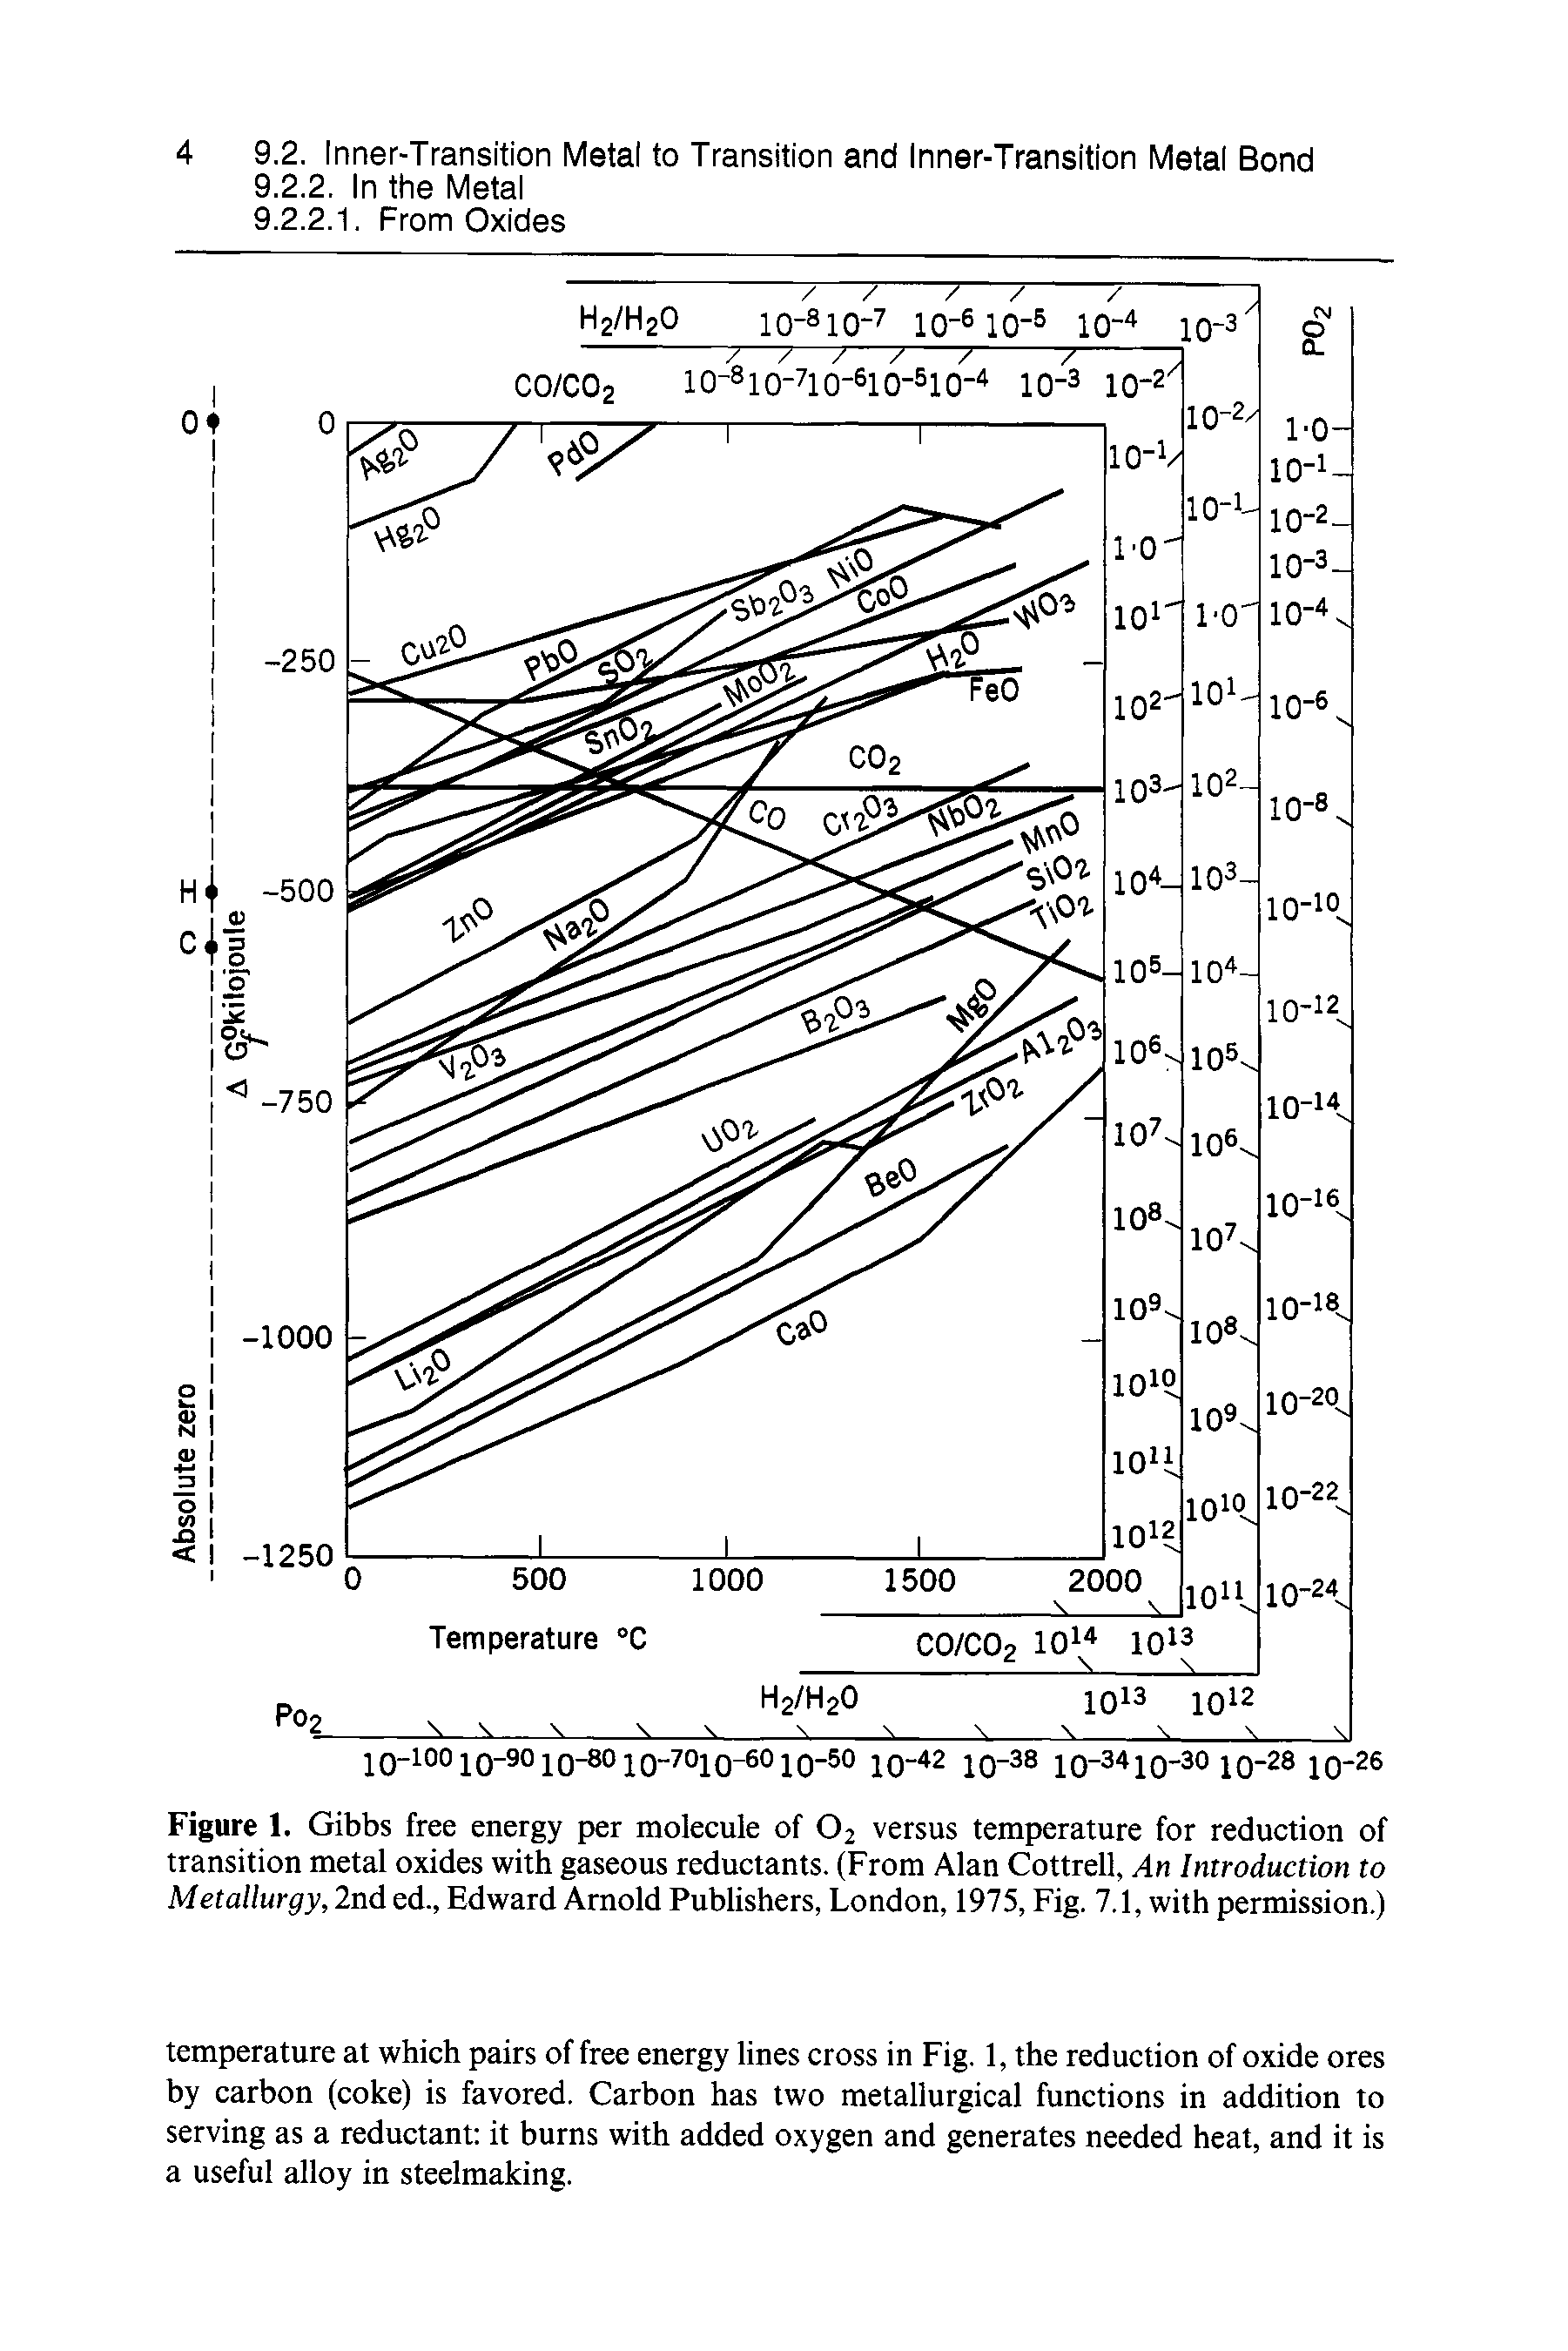 Figure 1. Gibbs free energy per molecule of O2 versus temperature for reduction of transition metal oxides with gaseous reductants. (From Alan Cottrell, An Introduction to Metallurgy, 2nd ed., Edward Arnold Publishers, London, 1975, Fig. 7.1, with permission.)...